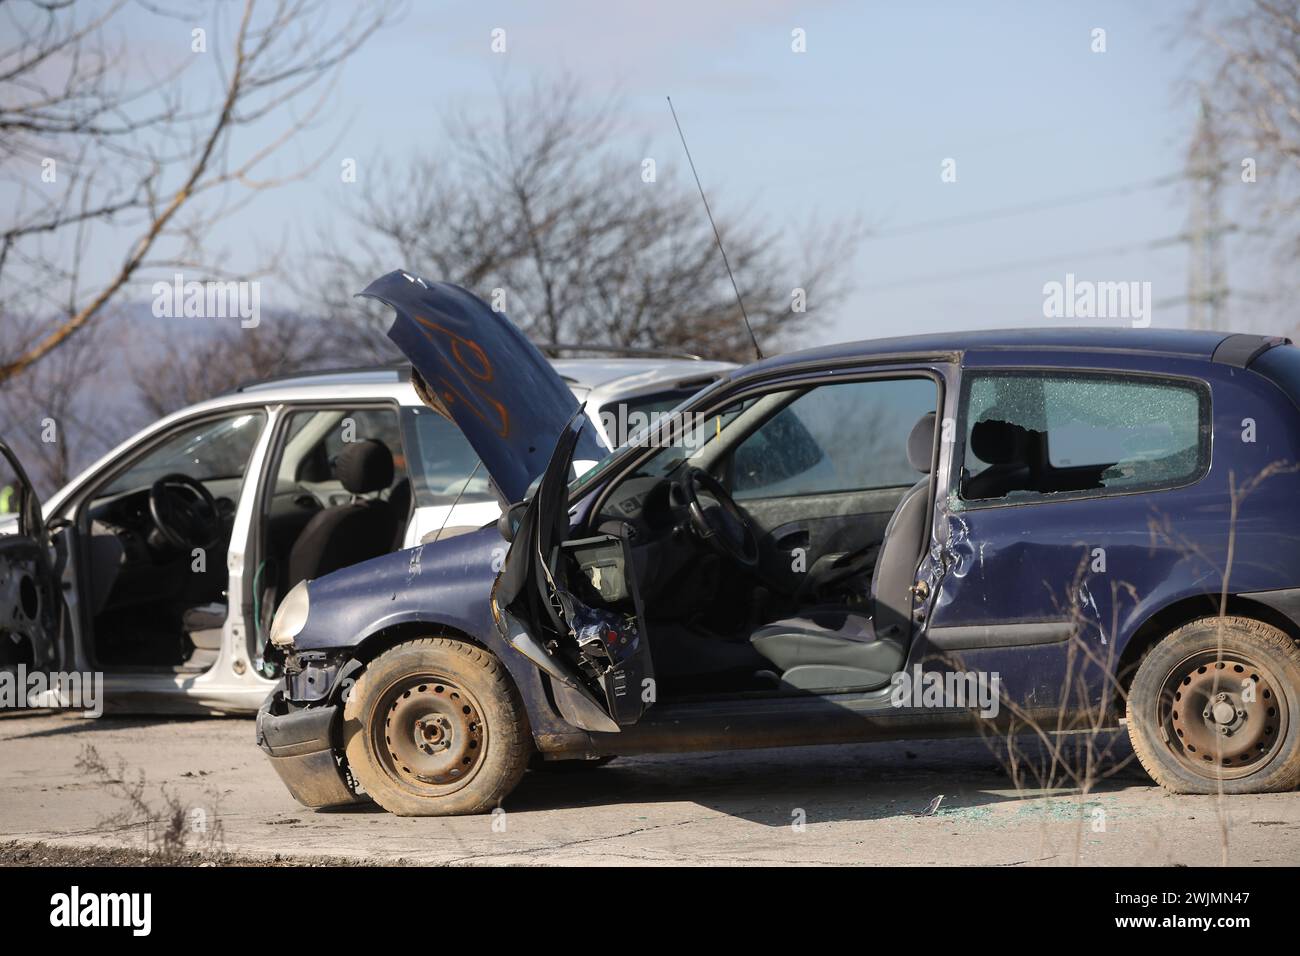 Fire and Rescue Imergency Units at car crash training on highway. Stock Photo